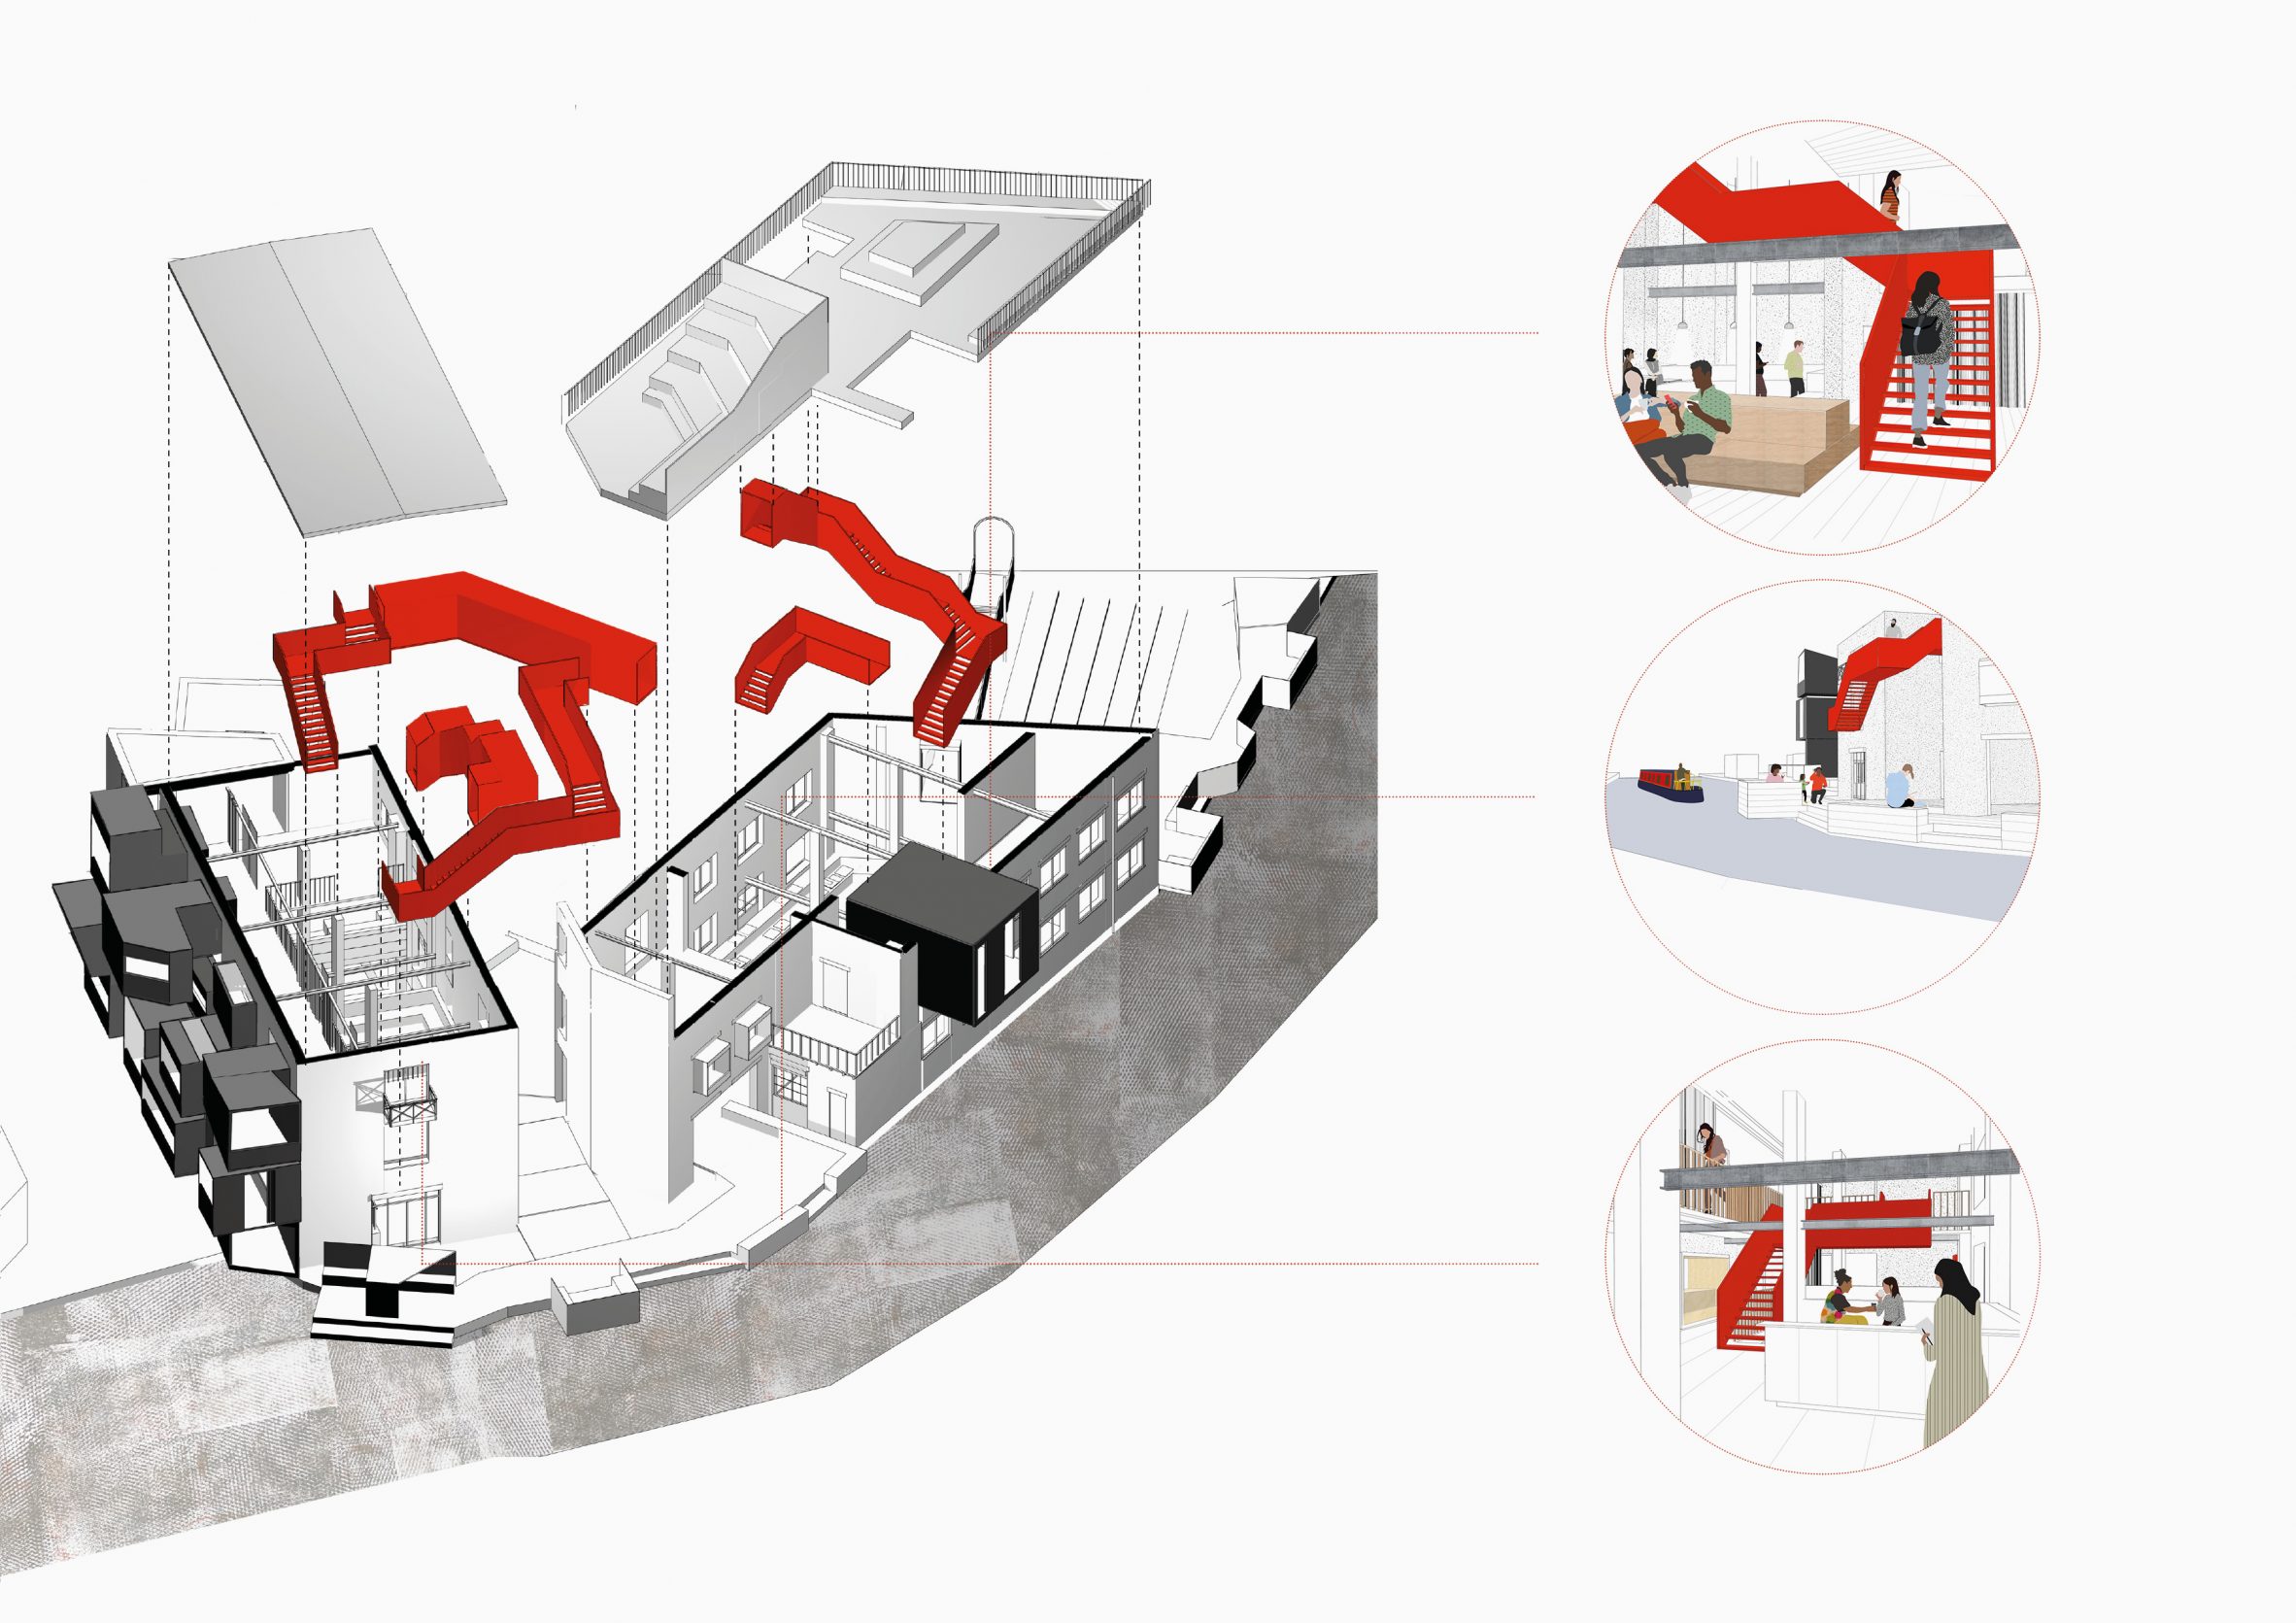 Diagrams and drawings of building with areas highlighted in red